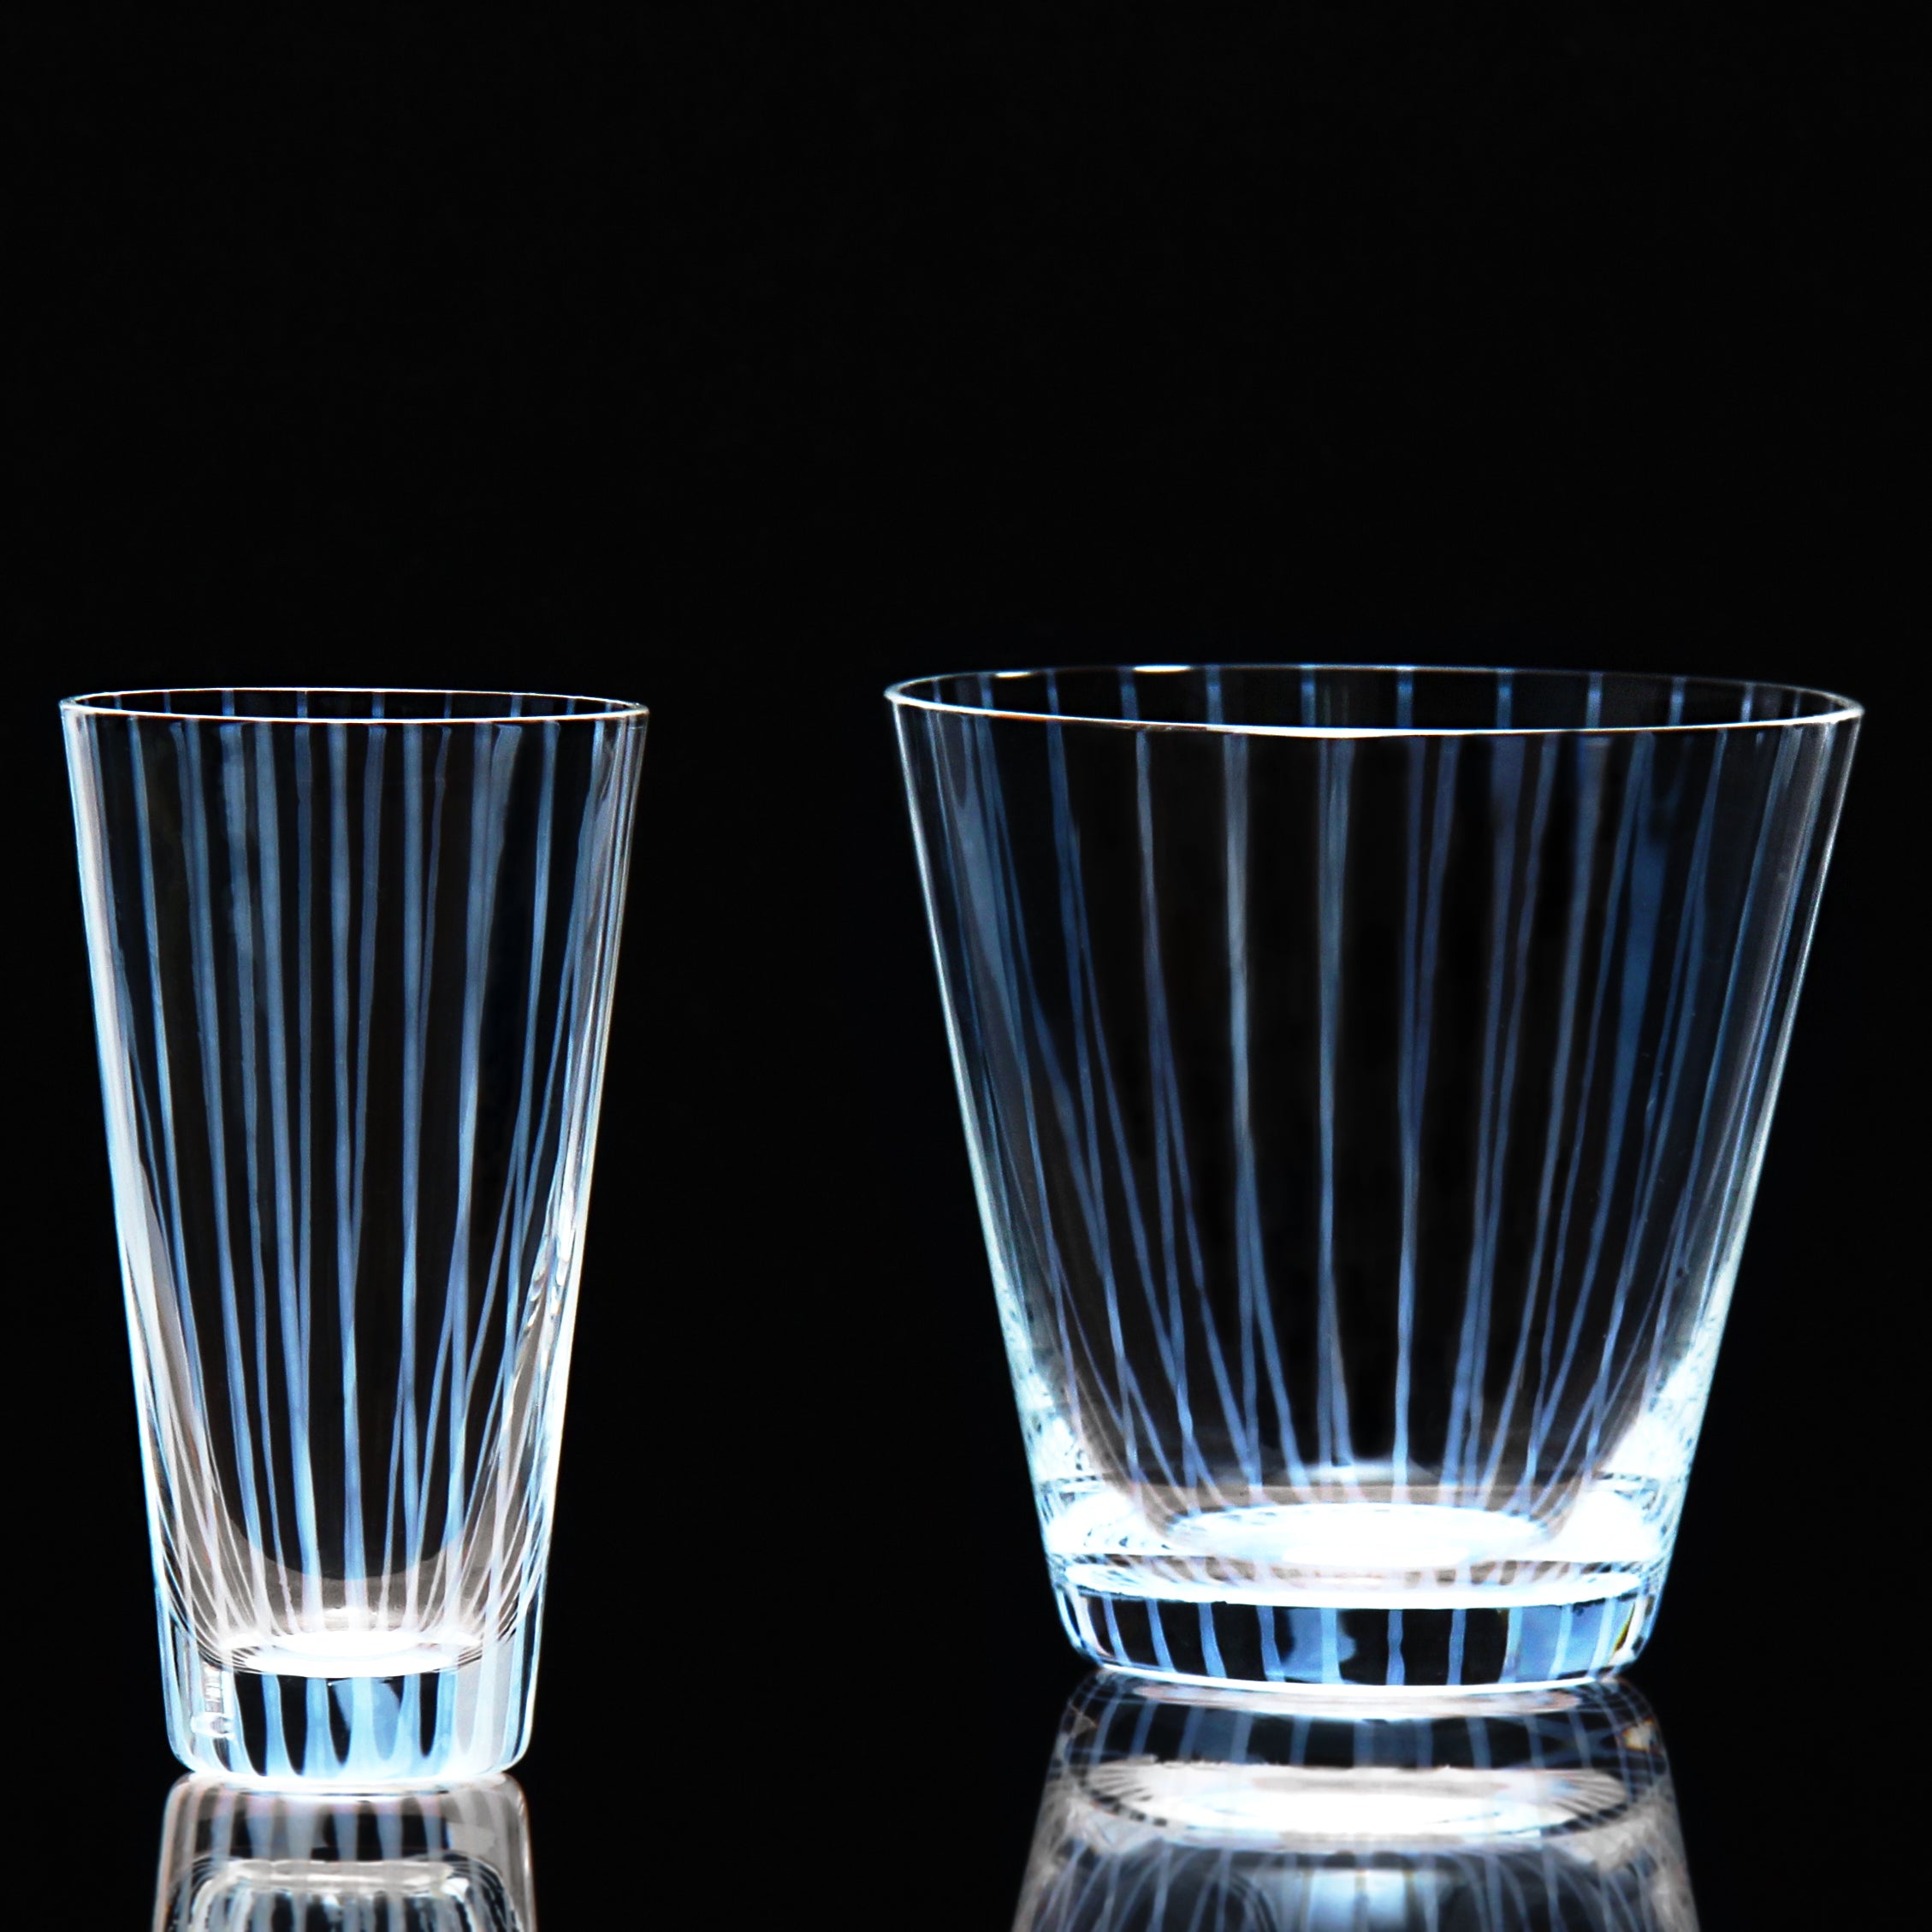 JAPANESE STRIPED SIPPING GLASS